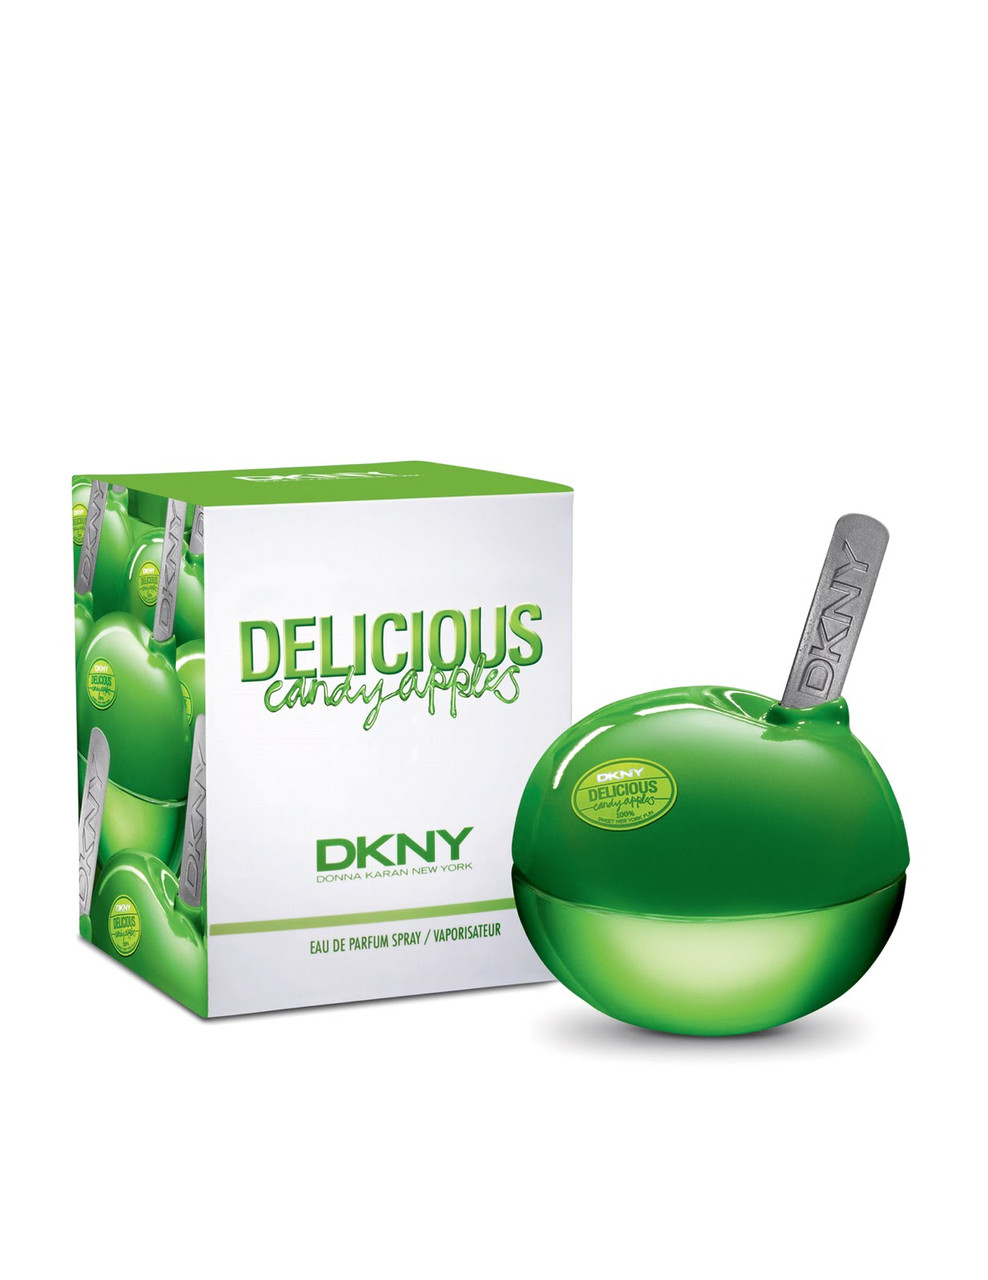 DKNY "Delicious Candy Apples Sweet Caramel" 50 ml - фото 1 - id-p39259159